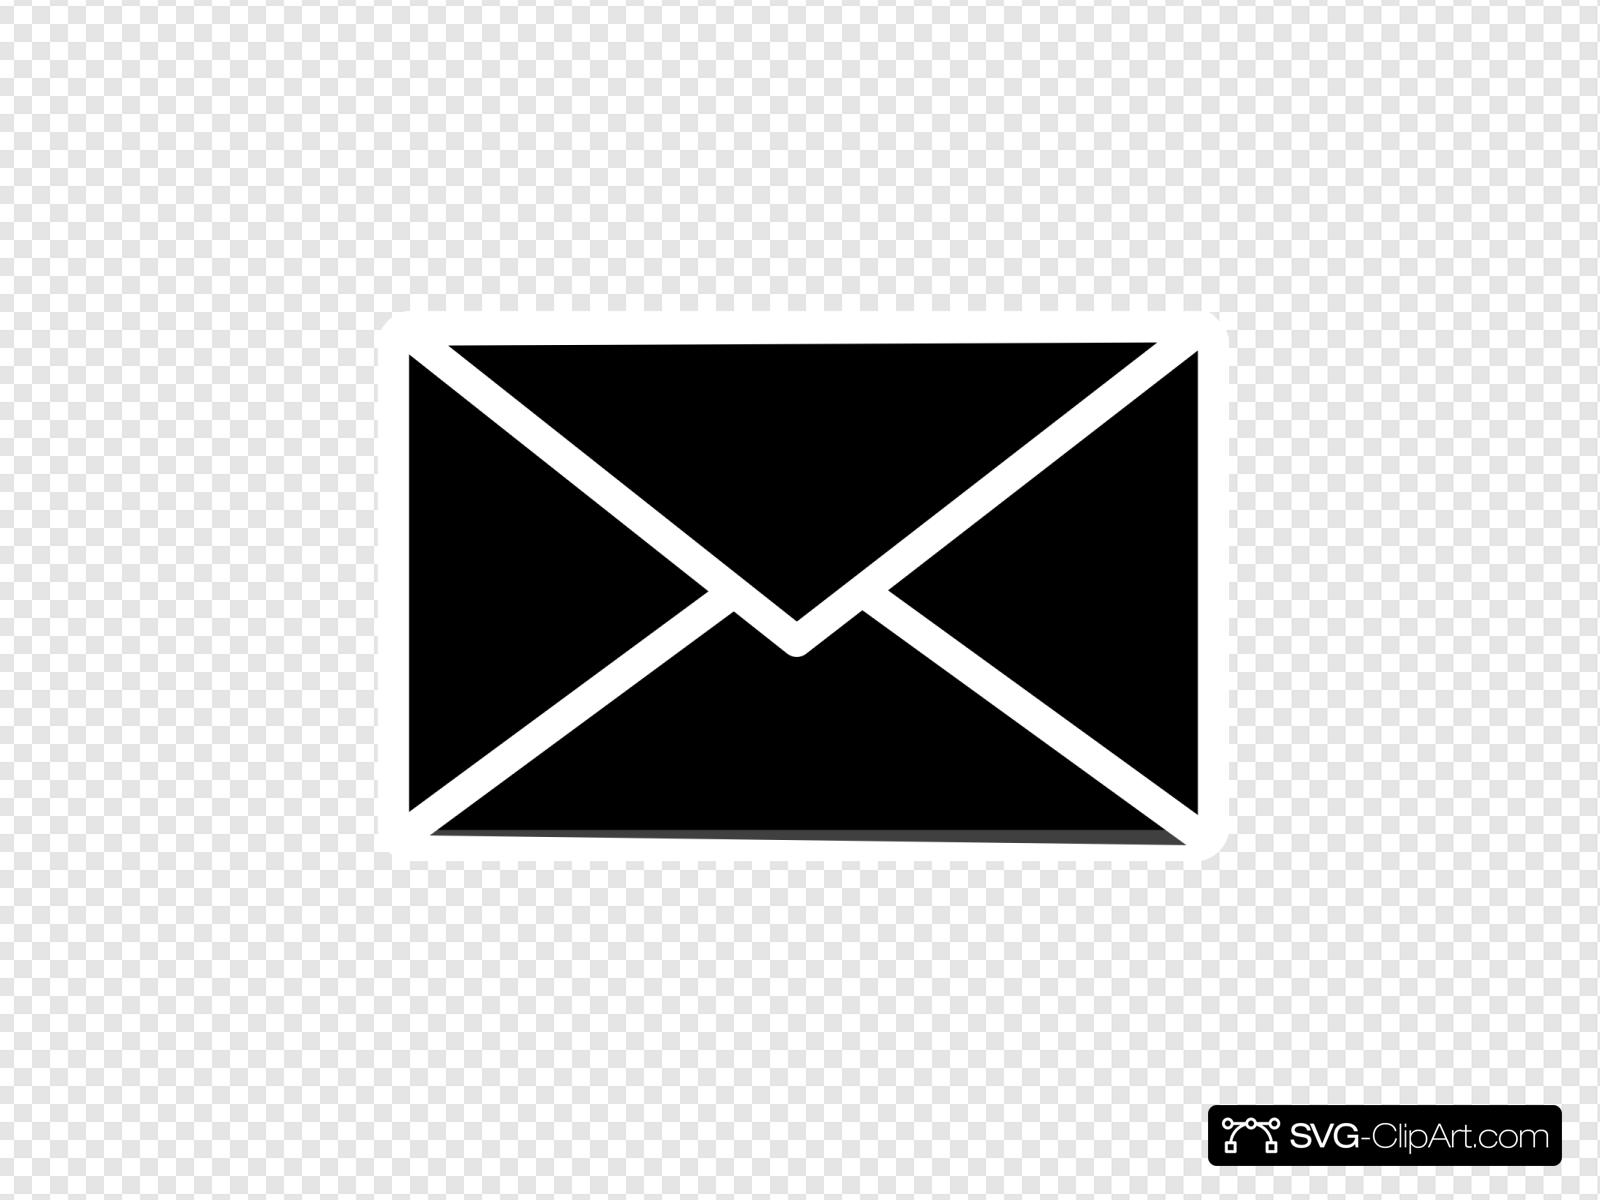 Email Icon Clip art, Icon and SVG